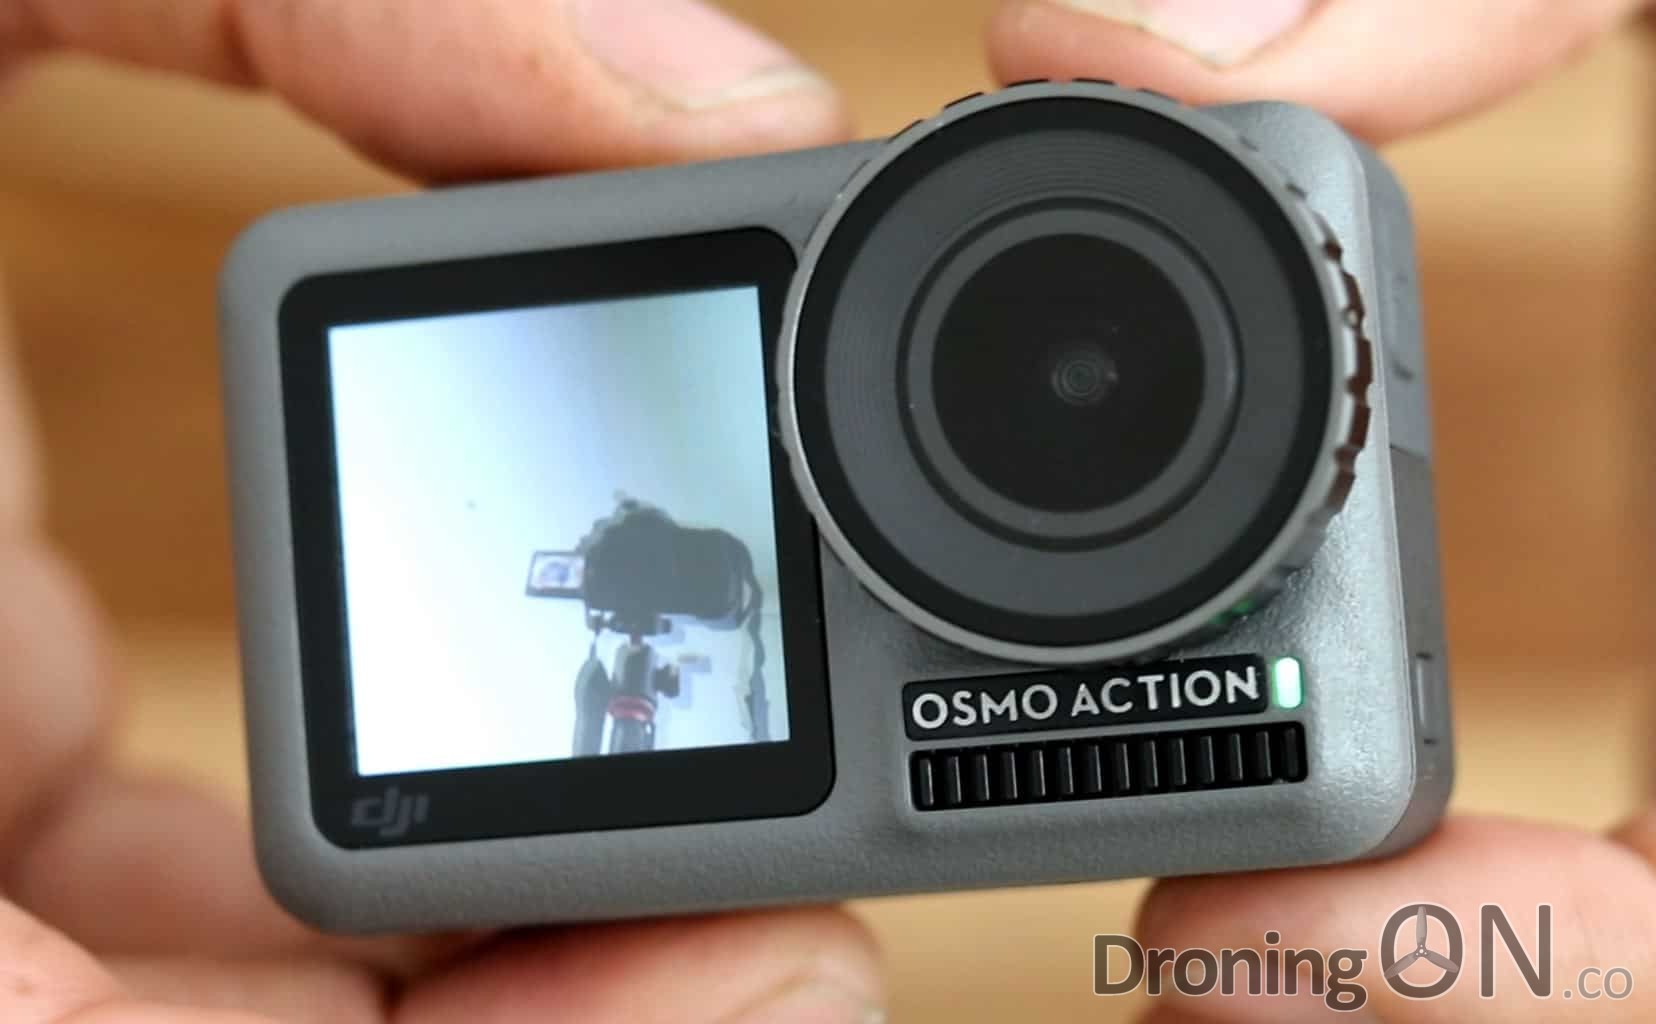 The new DJI Osmo Action camera, with its full colour front-facing screen.